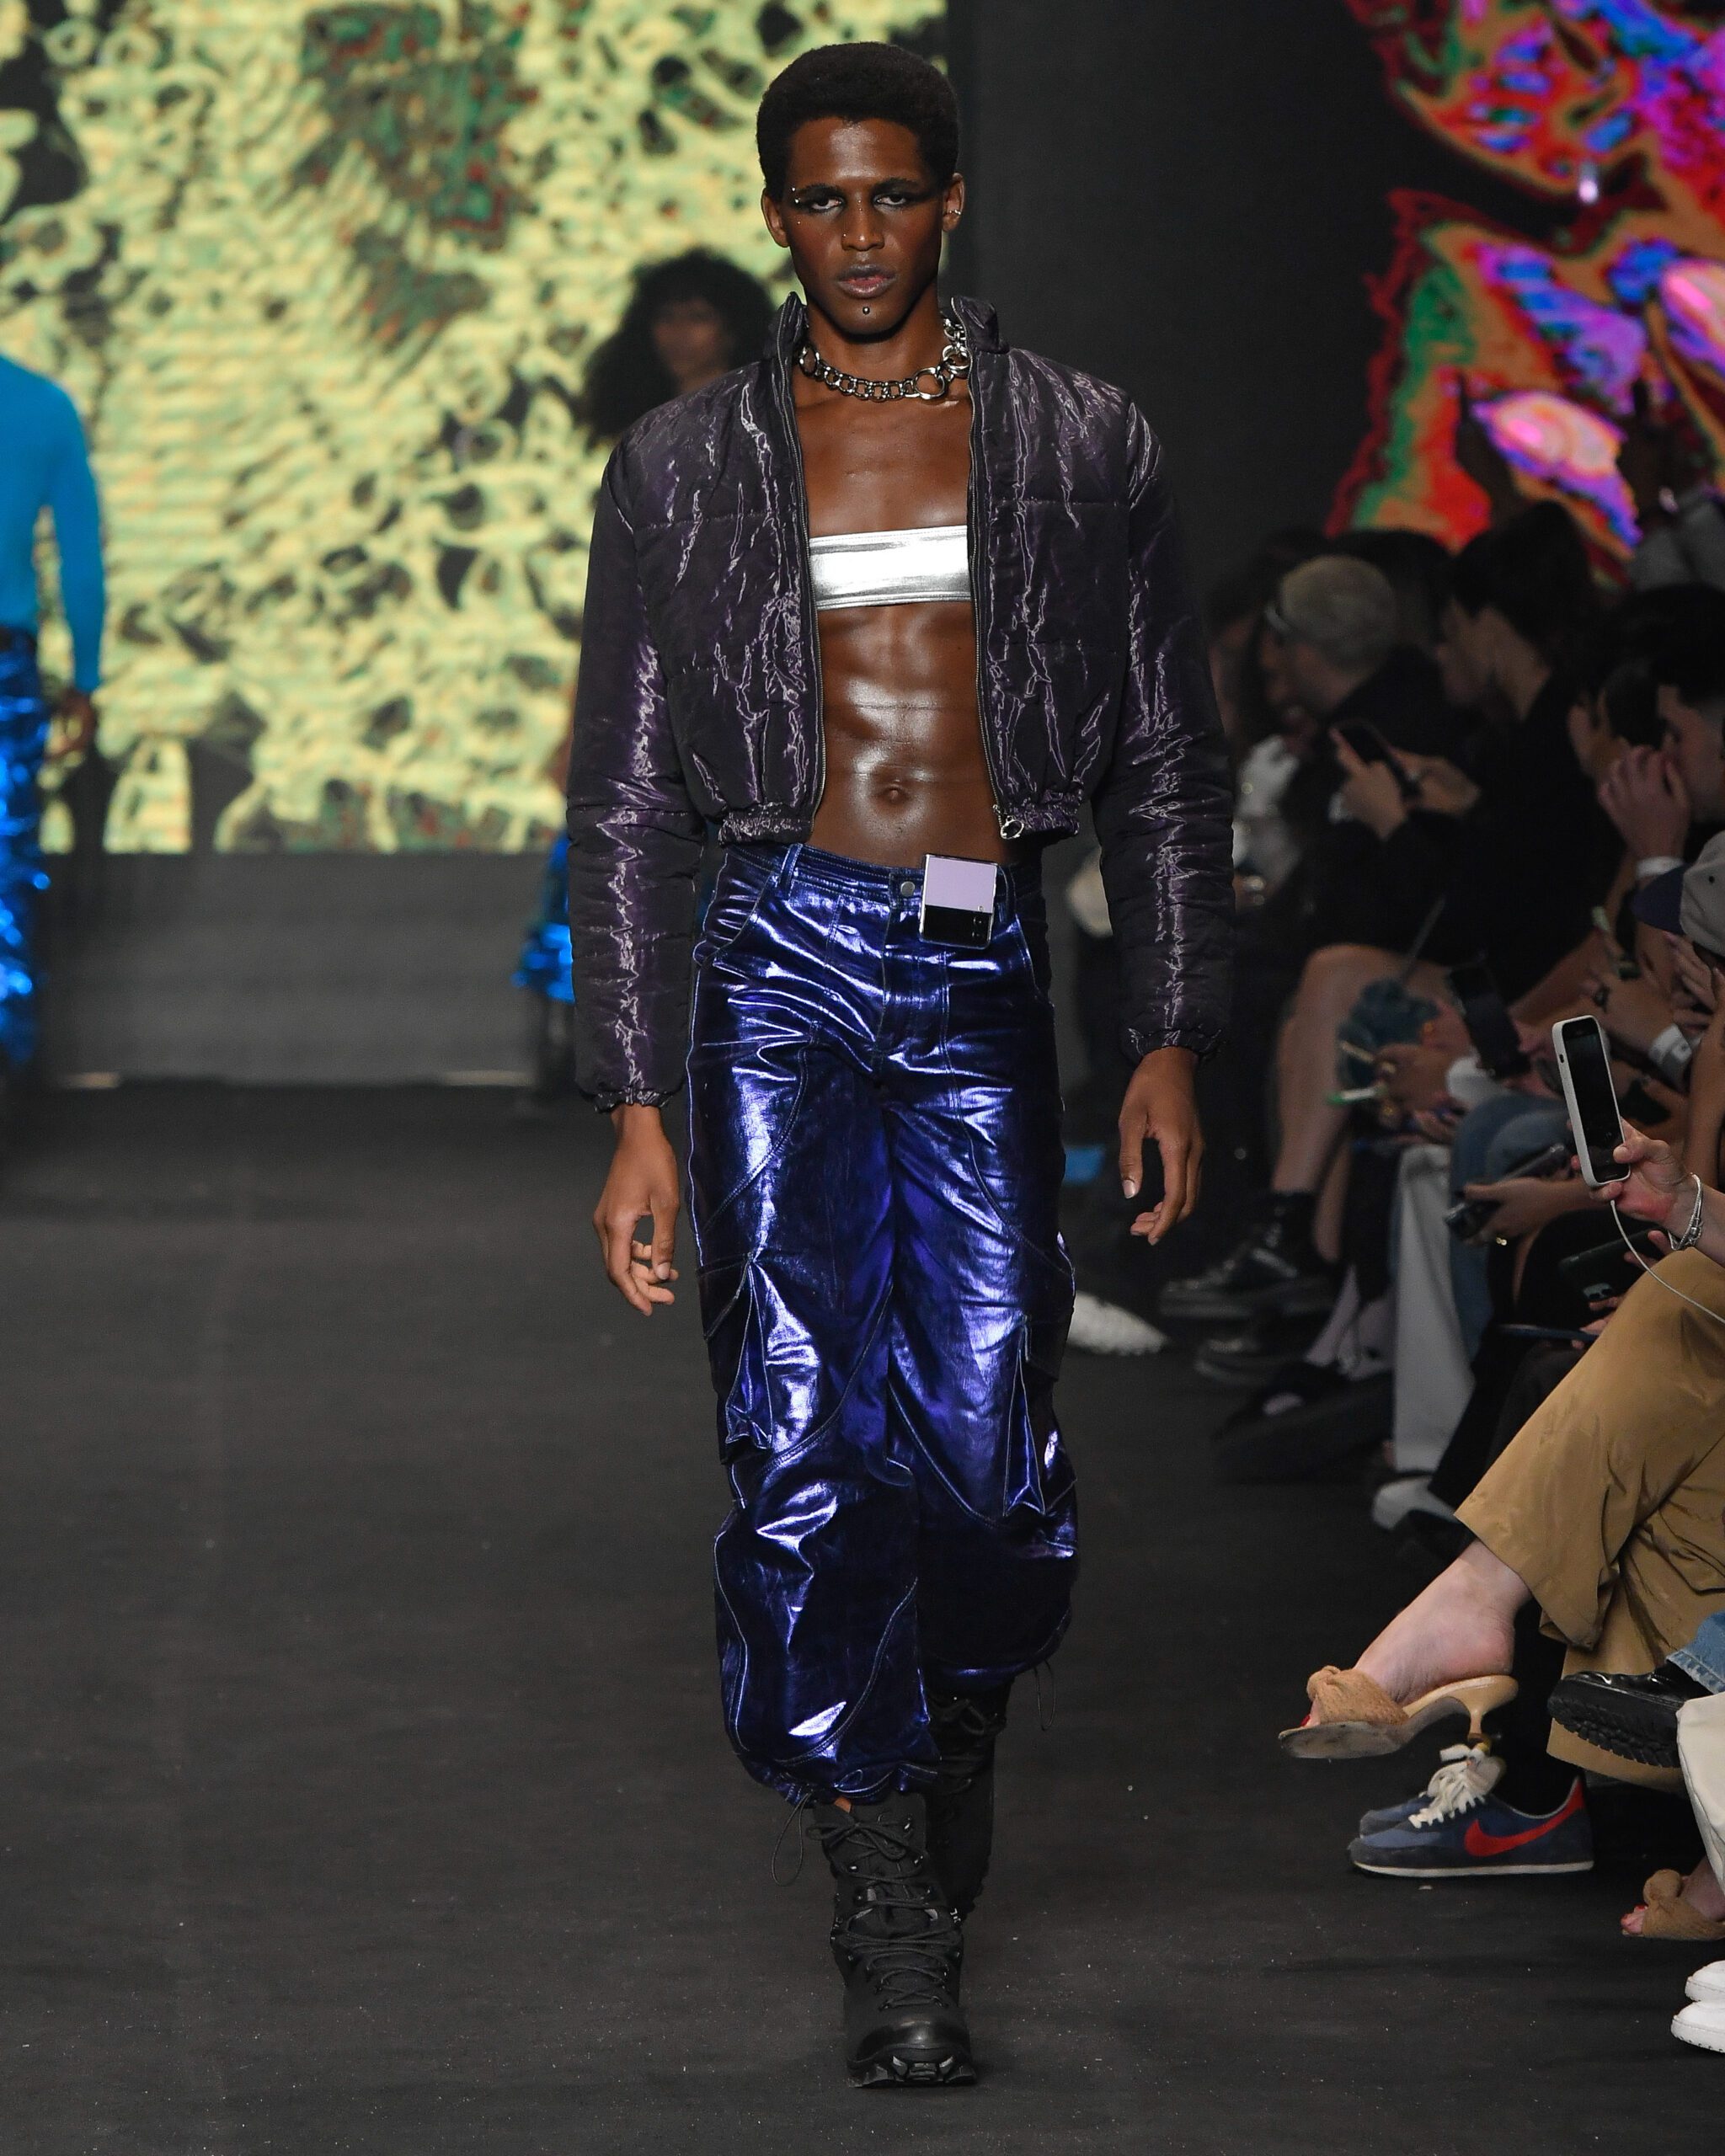 Another PlaceSPFW N54Ze Takahashi / @agfotosite